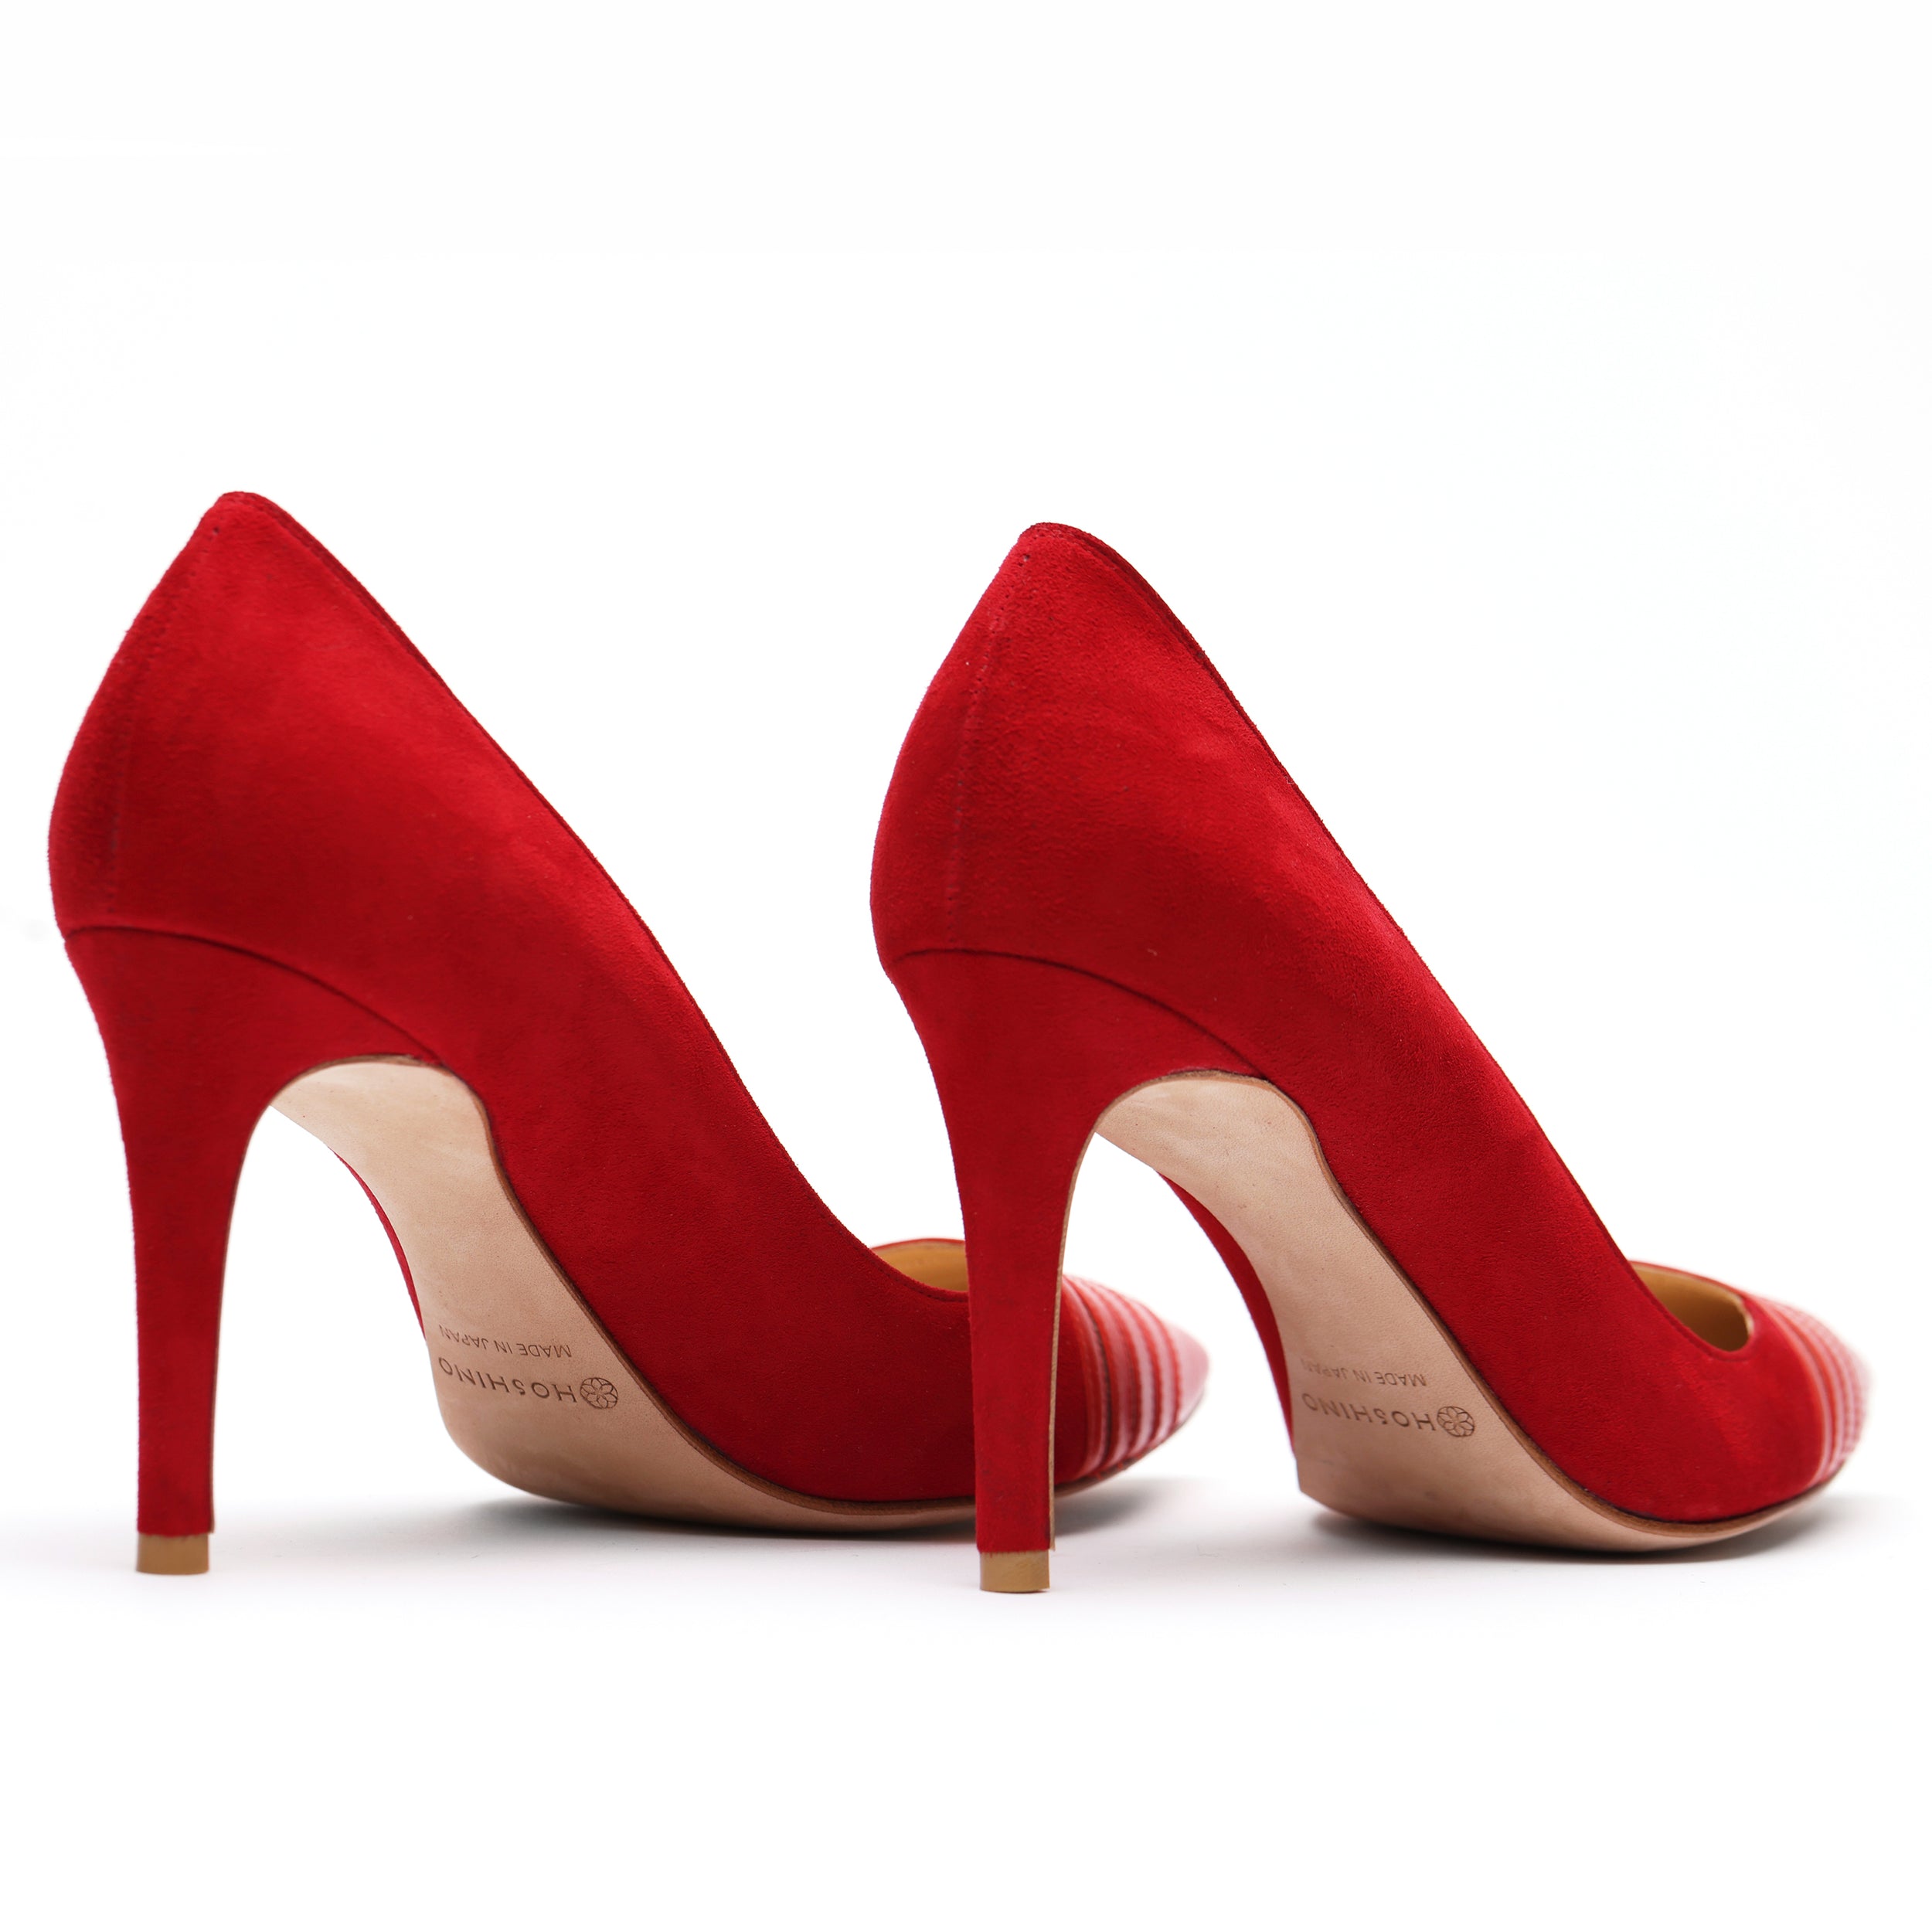 [women's] reunion - striped pumps - red suede x red baby calfskin